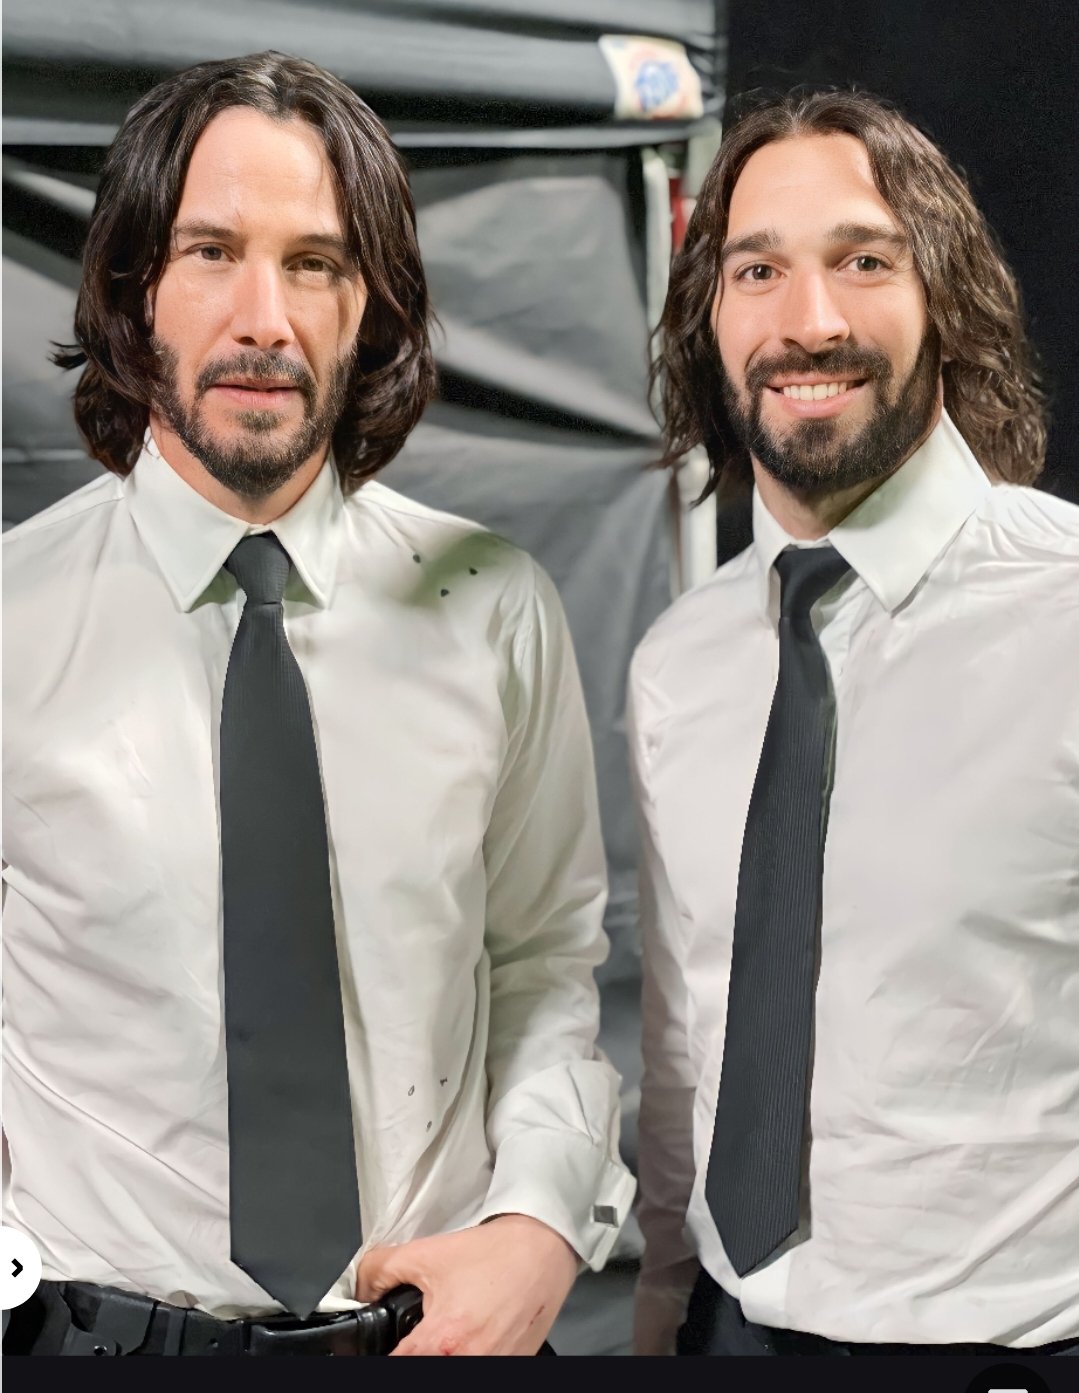 bao john wick surprised everyone when he gave his taxpayer actor an audi r on thanksgiving day and thanked him for accompanying him 653aae974f8e4 John Wick Surprised Everyone When He Gave His Taxpayer Actor An Audi R8 On Thanksgiving Day And Thanked Him For Accompanying Him.